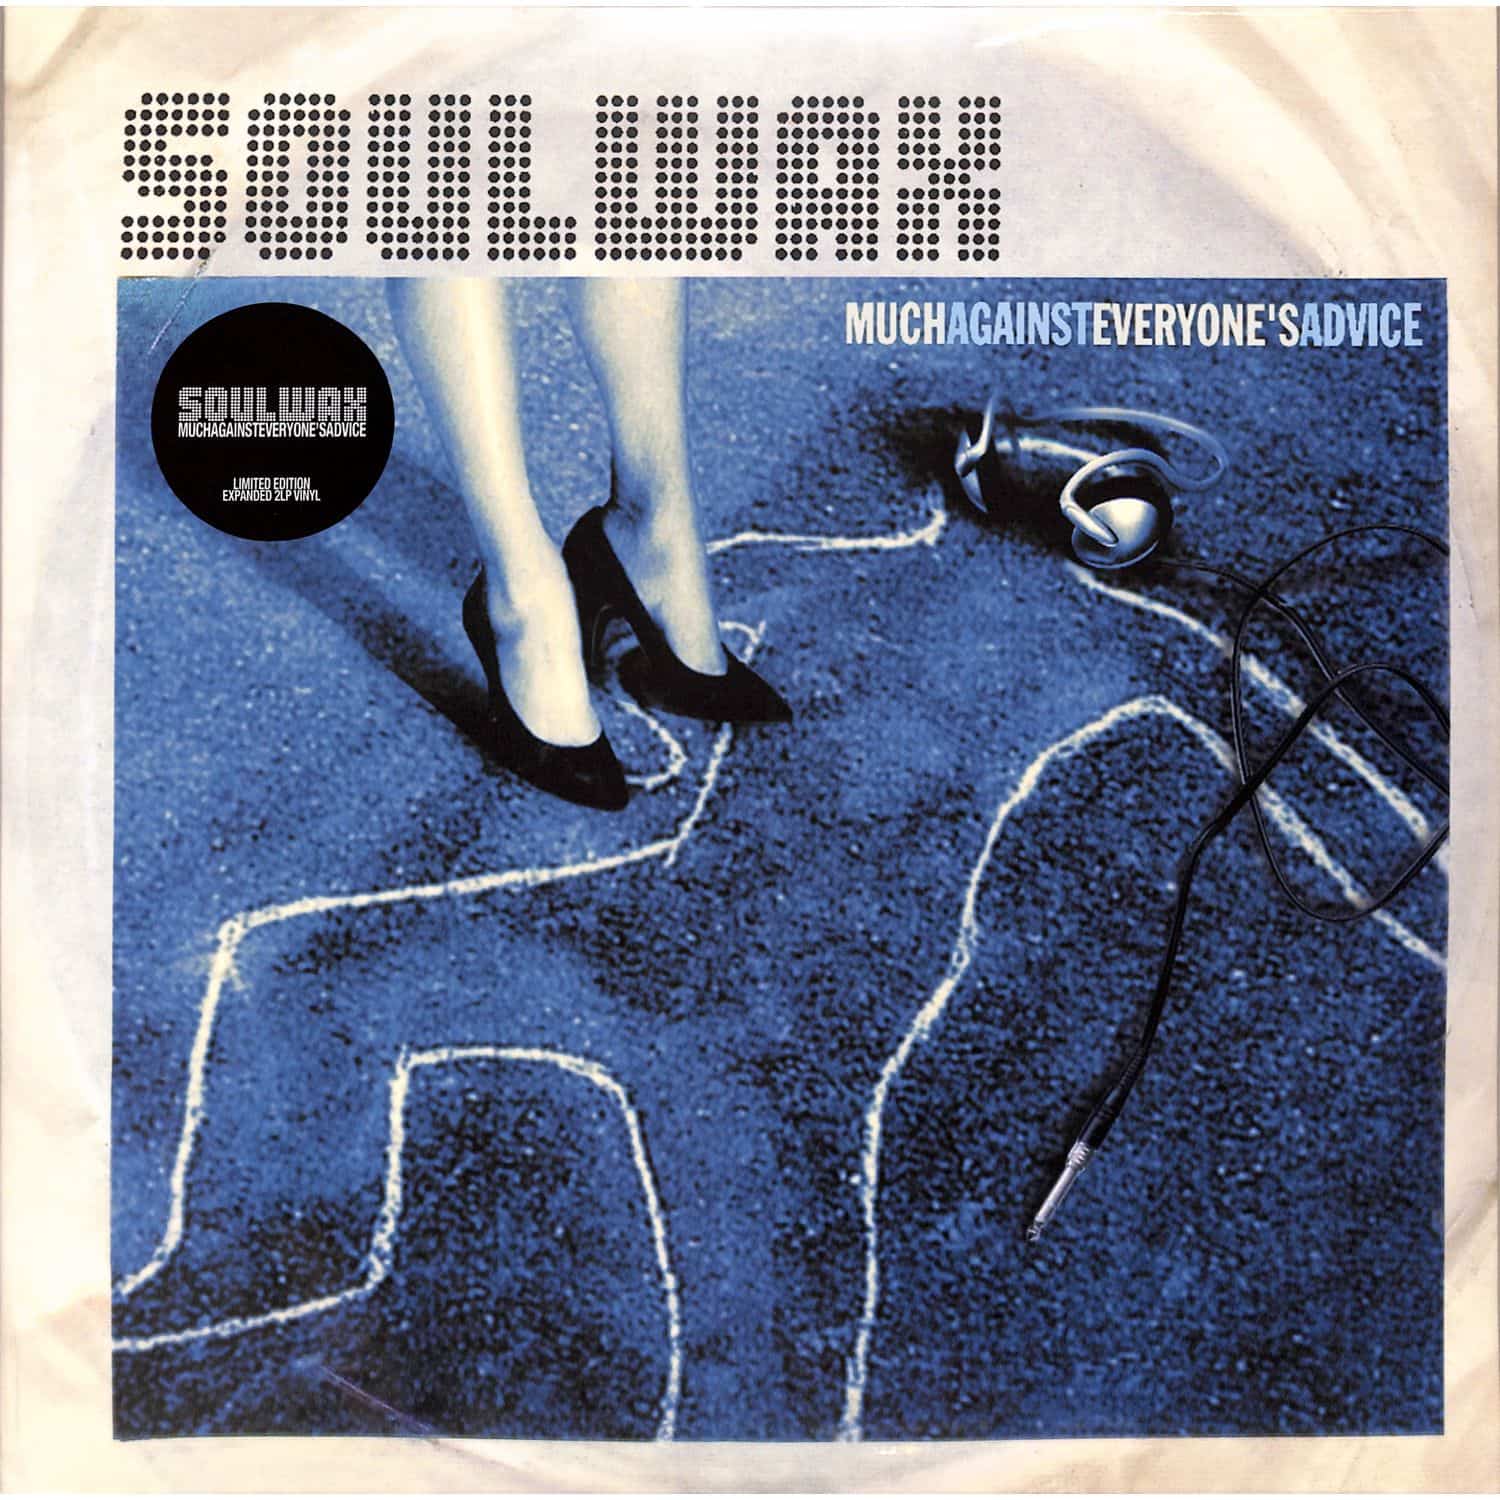 Soulwax - MUCH AGAINST EVERYONES ADVICE 